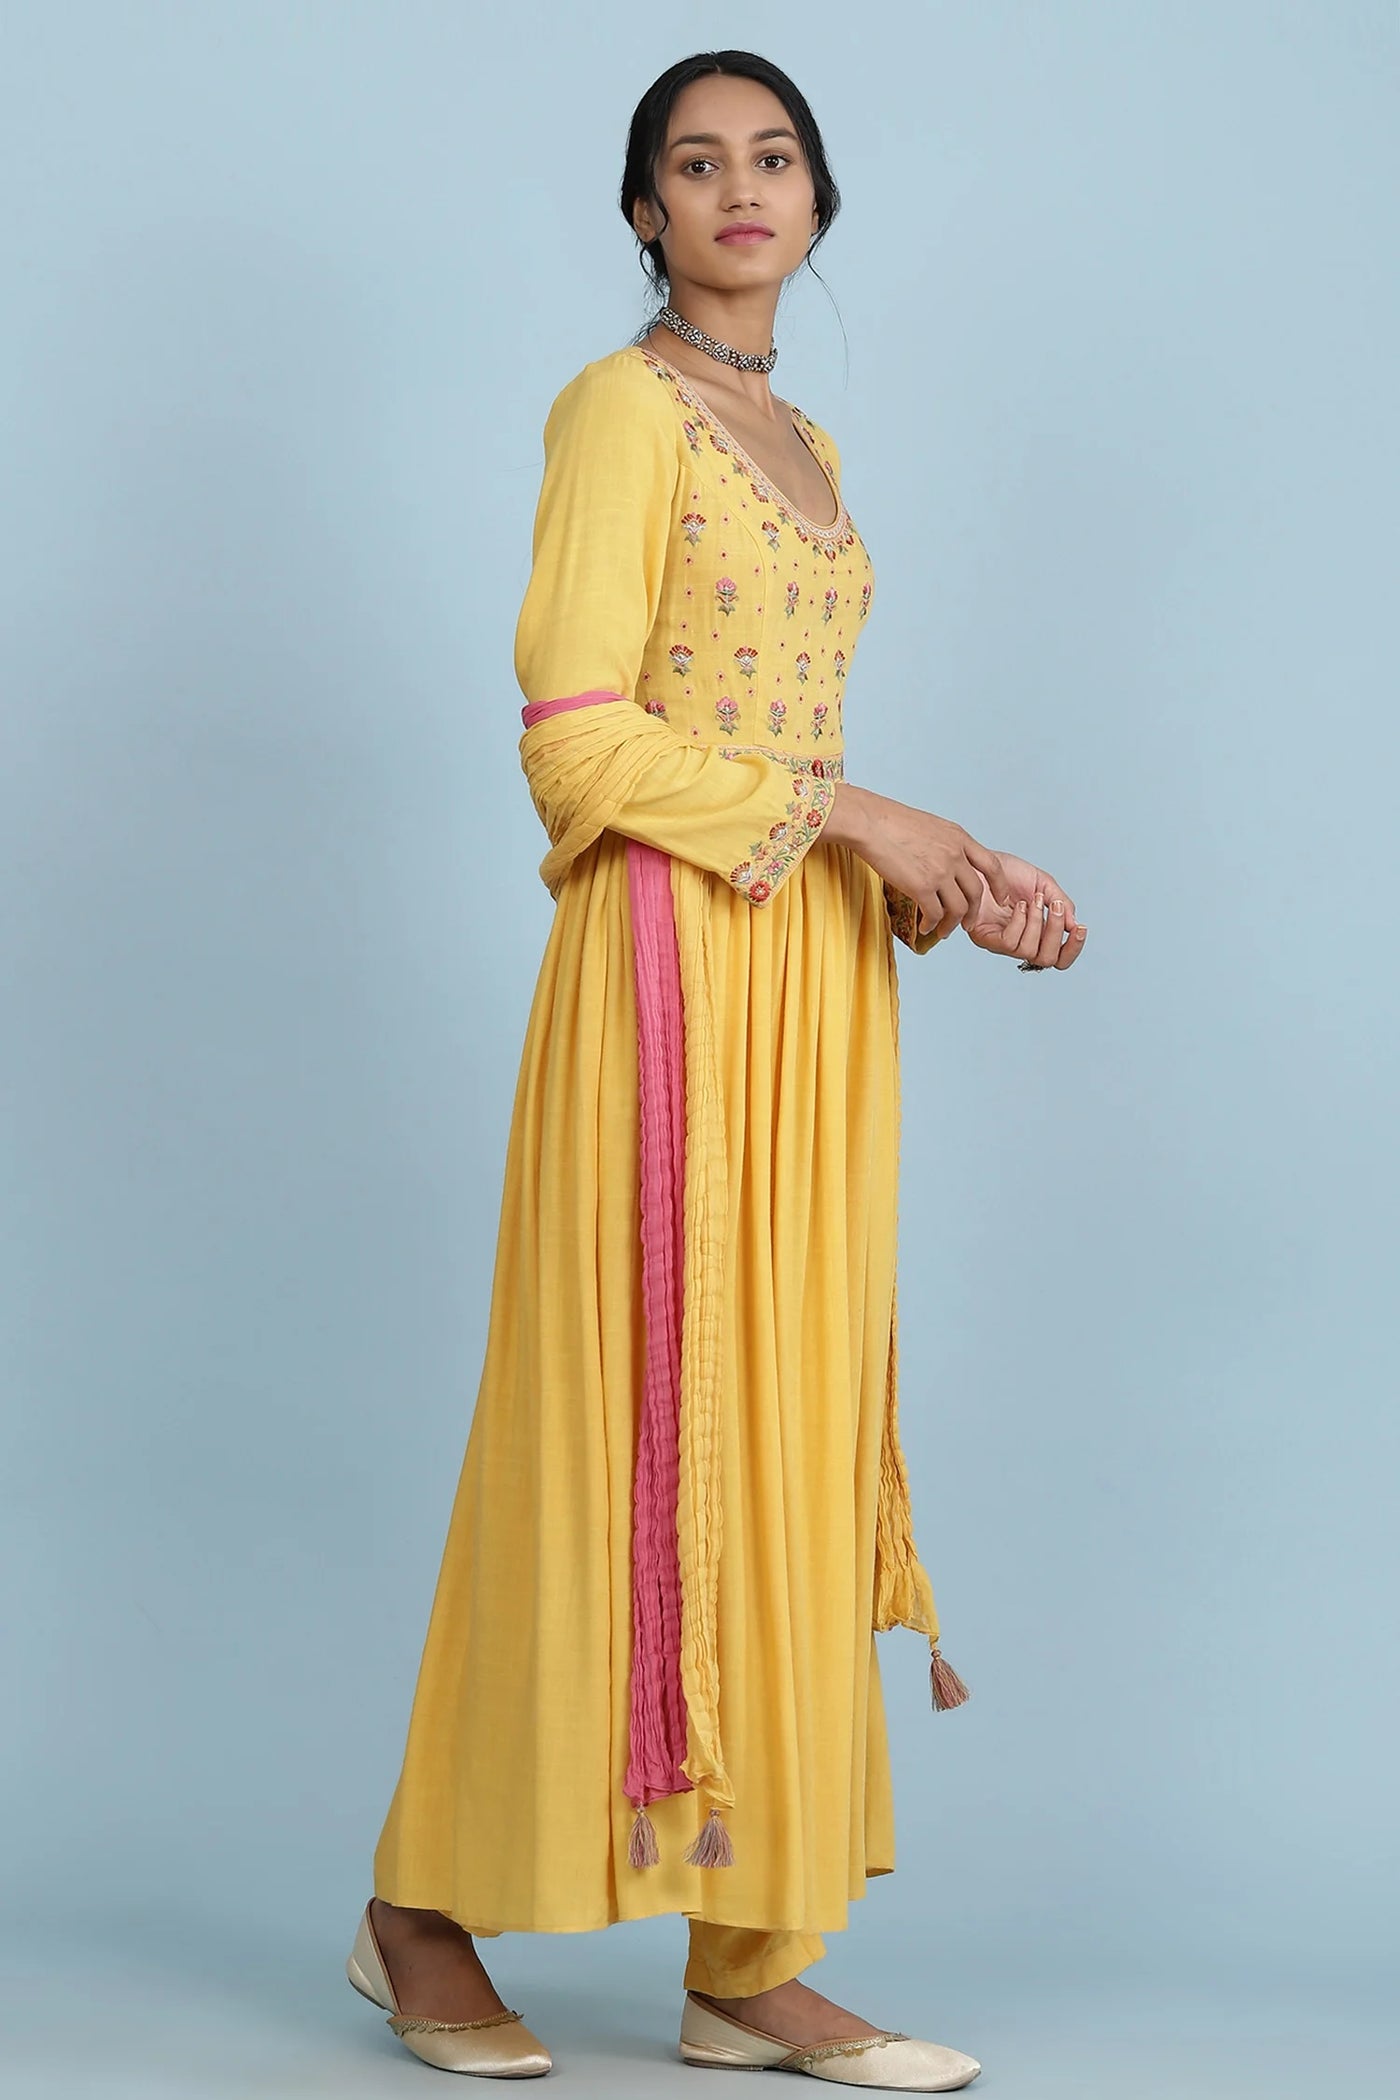 Yellow Slub Anarkali Set Indian Clothing in Denver, CO, Aurora, CO, Boulder, CO, Fort Collins, CO, Colorado Springs, CO, Parker, CO, Highlands Ranch, CO, Cherry Creek, CO, Centennial, CO, and Longmont, CO. NATIONWIDE SHIPPING USA- India Fashion X